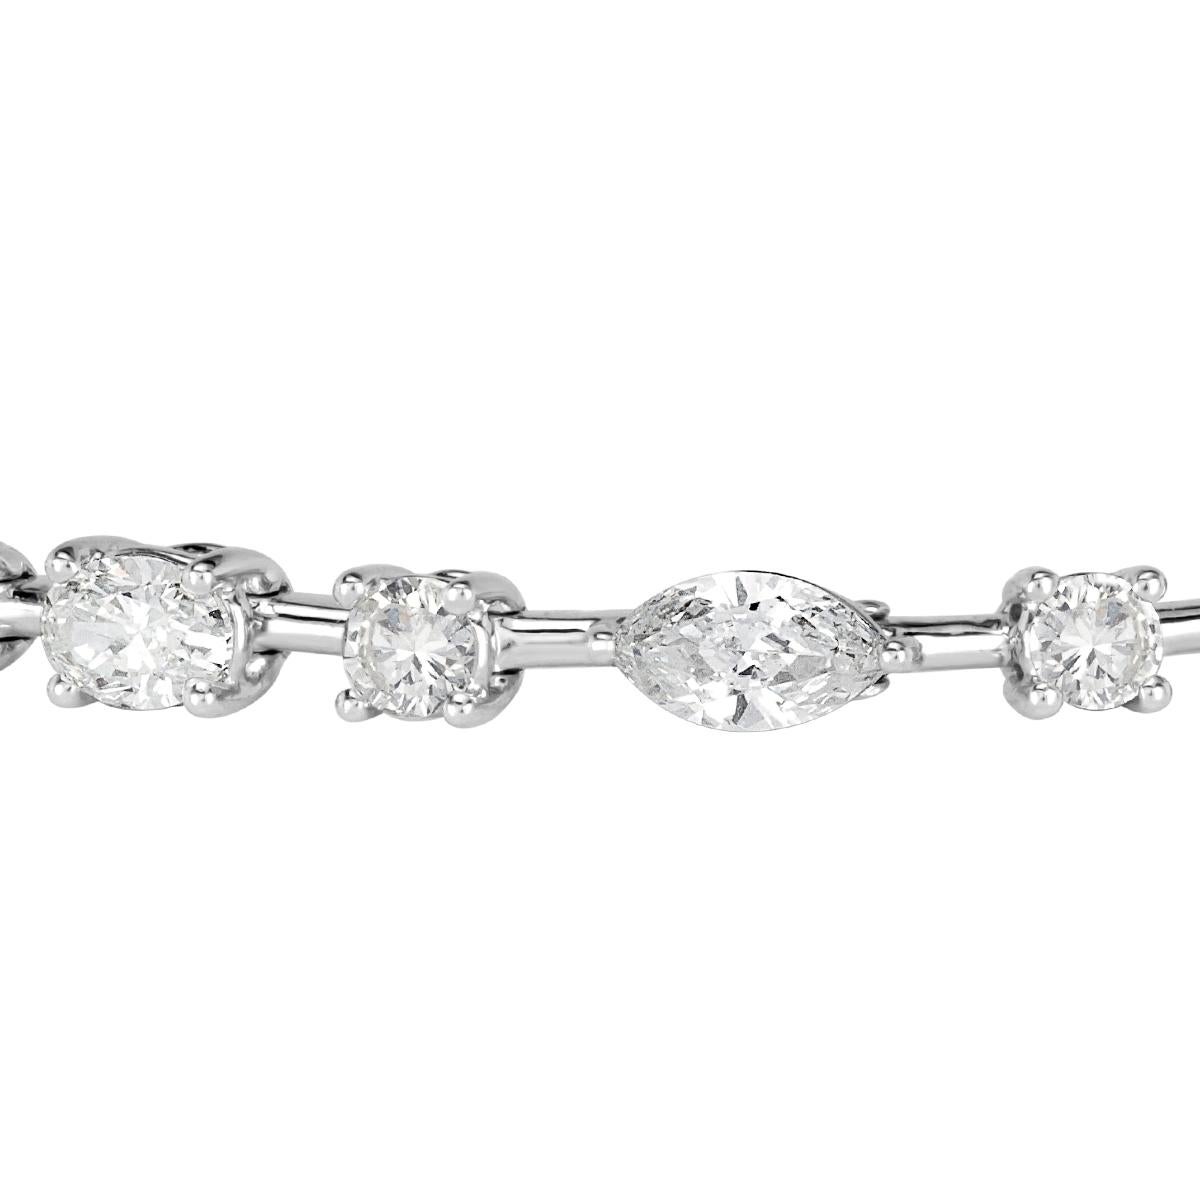 5.81ct Oval Cut Marquise Cut & Round Brilliant Cut Diamond Bracelet in 18k Gold In New Condition For Sale In Los Angeles, CA